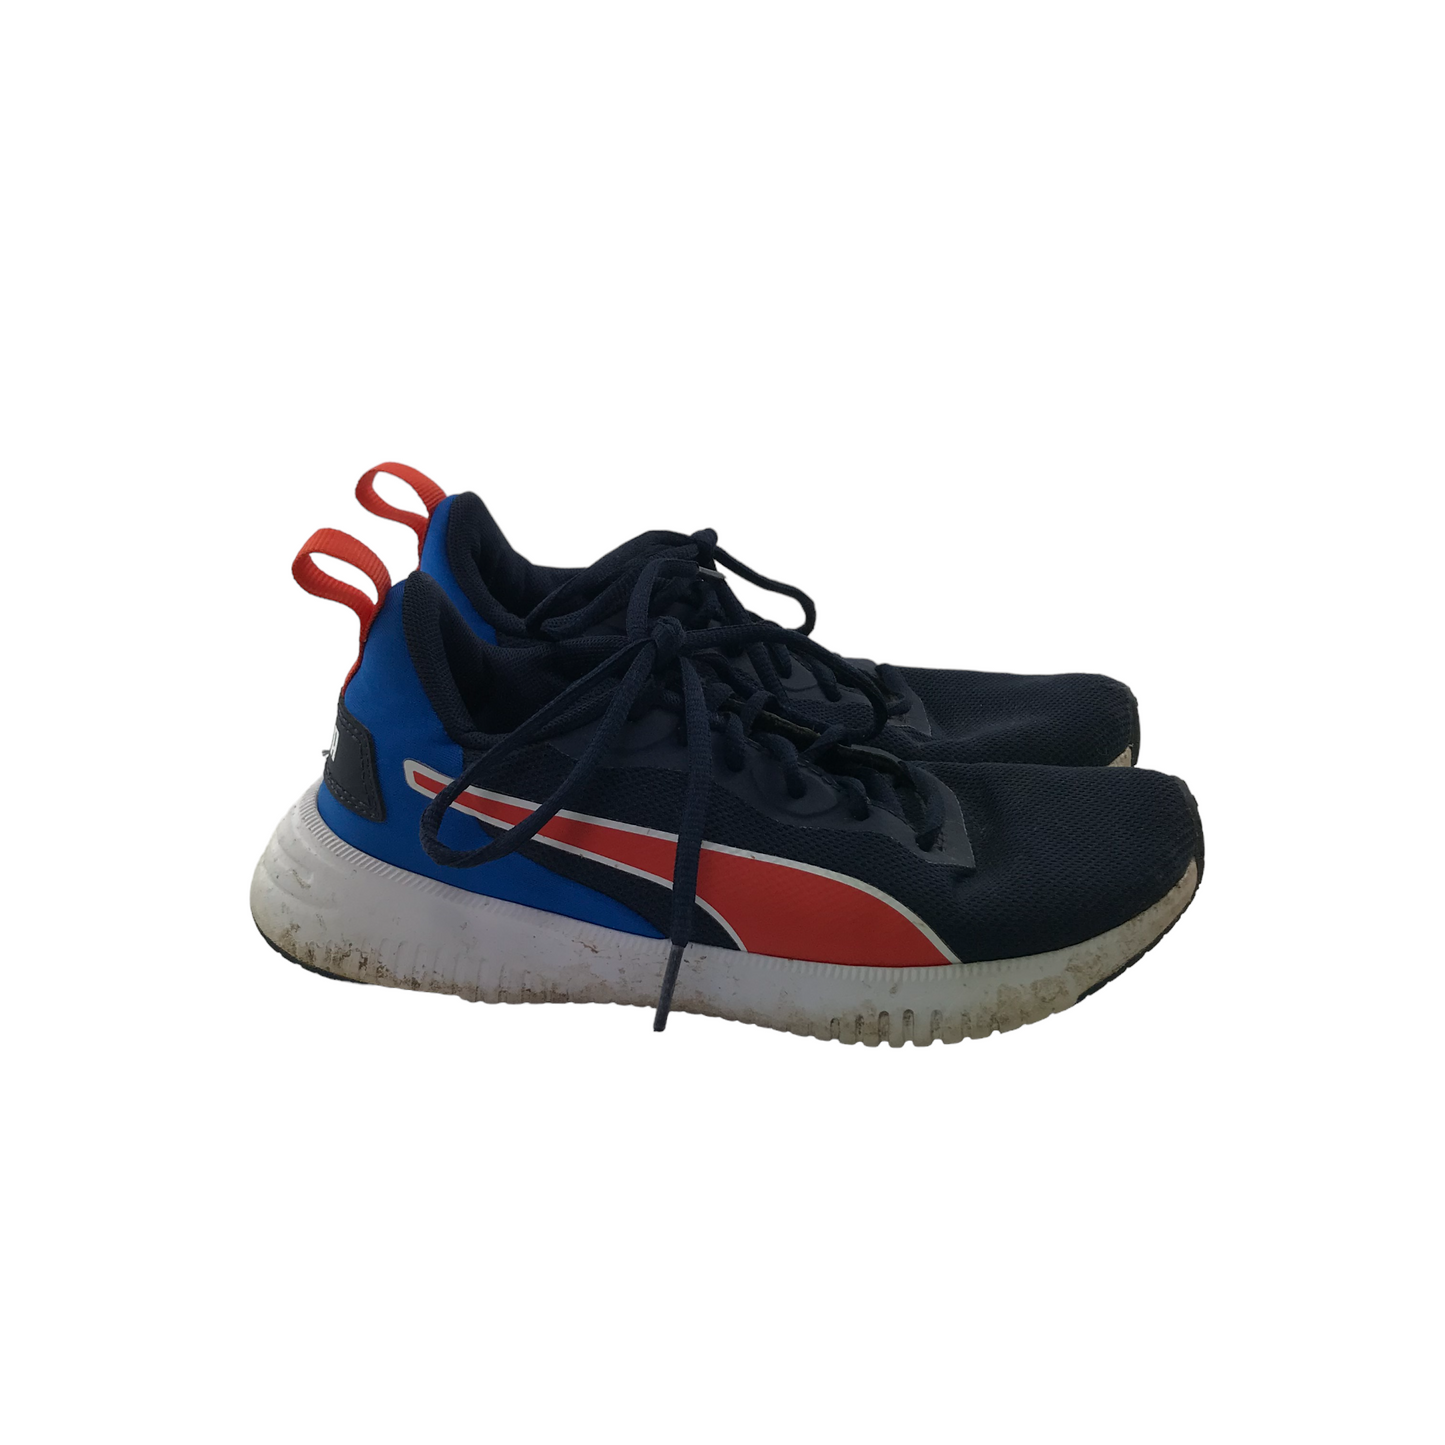 Puma Navy Red and Blue Trainers Shoe Size 4